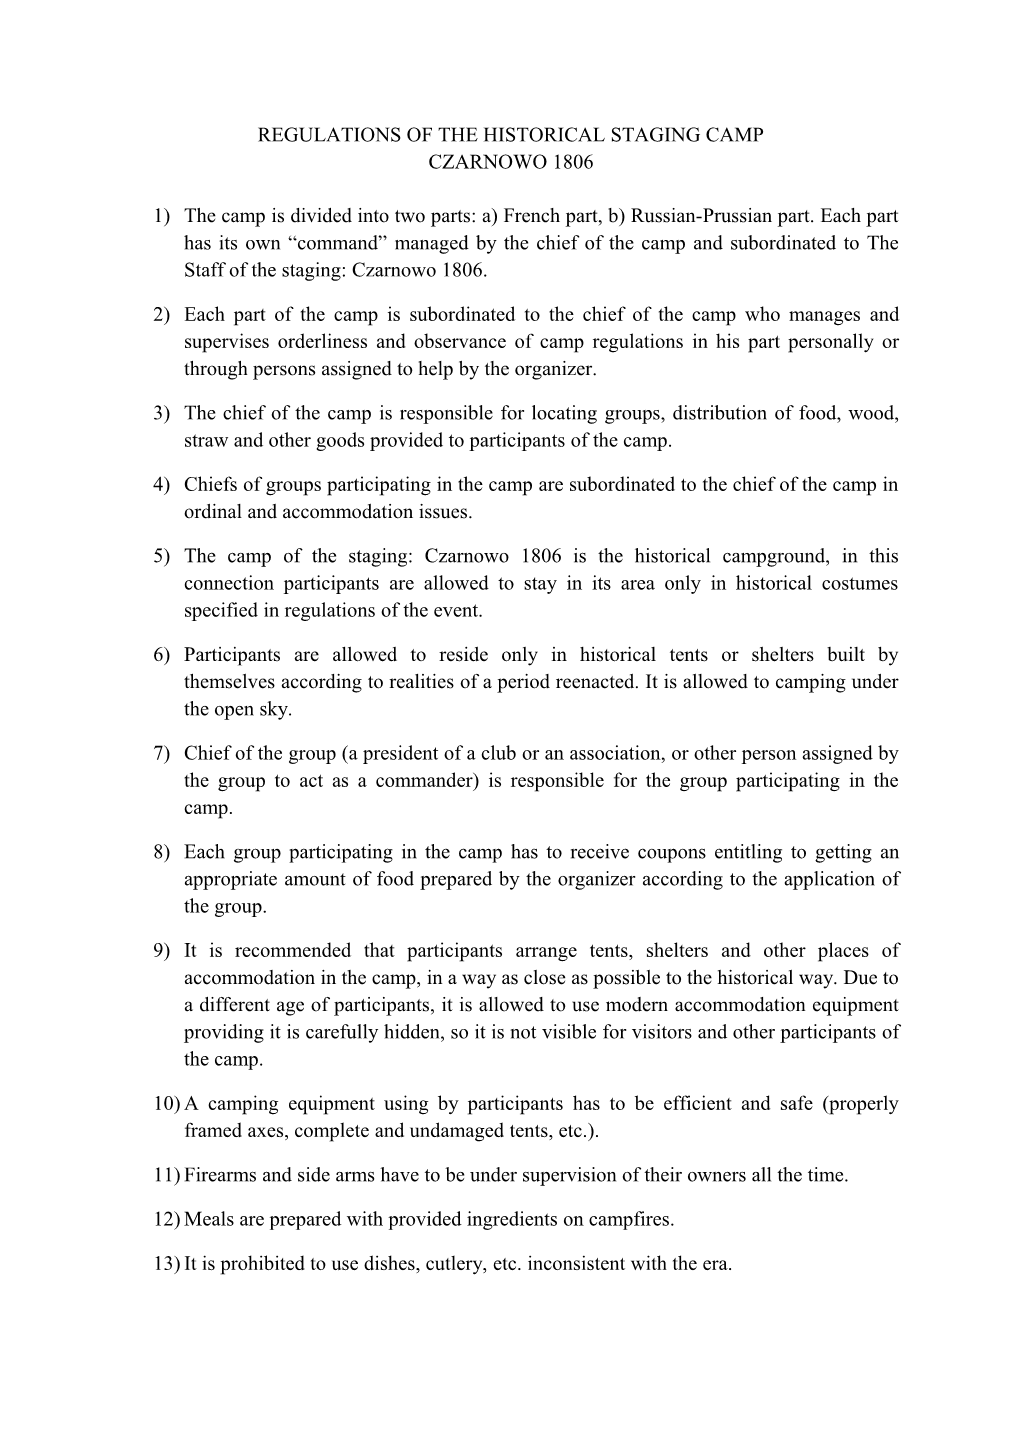 Regulations of the Historical Staging Camp